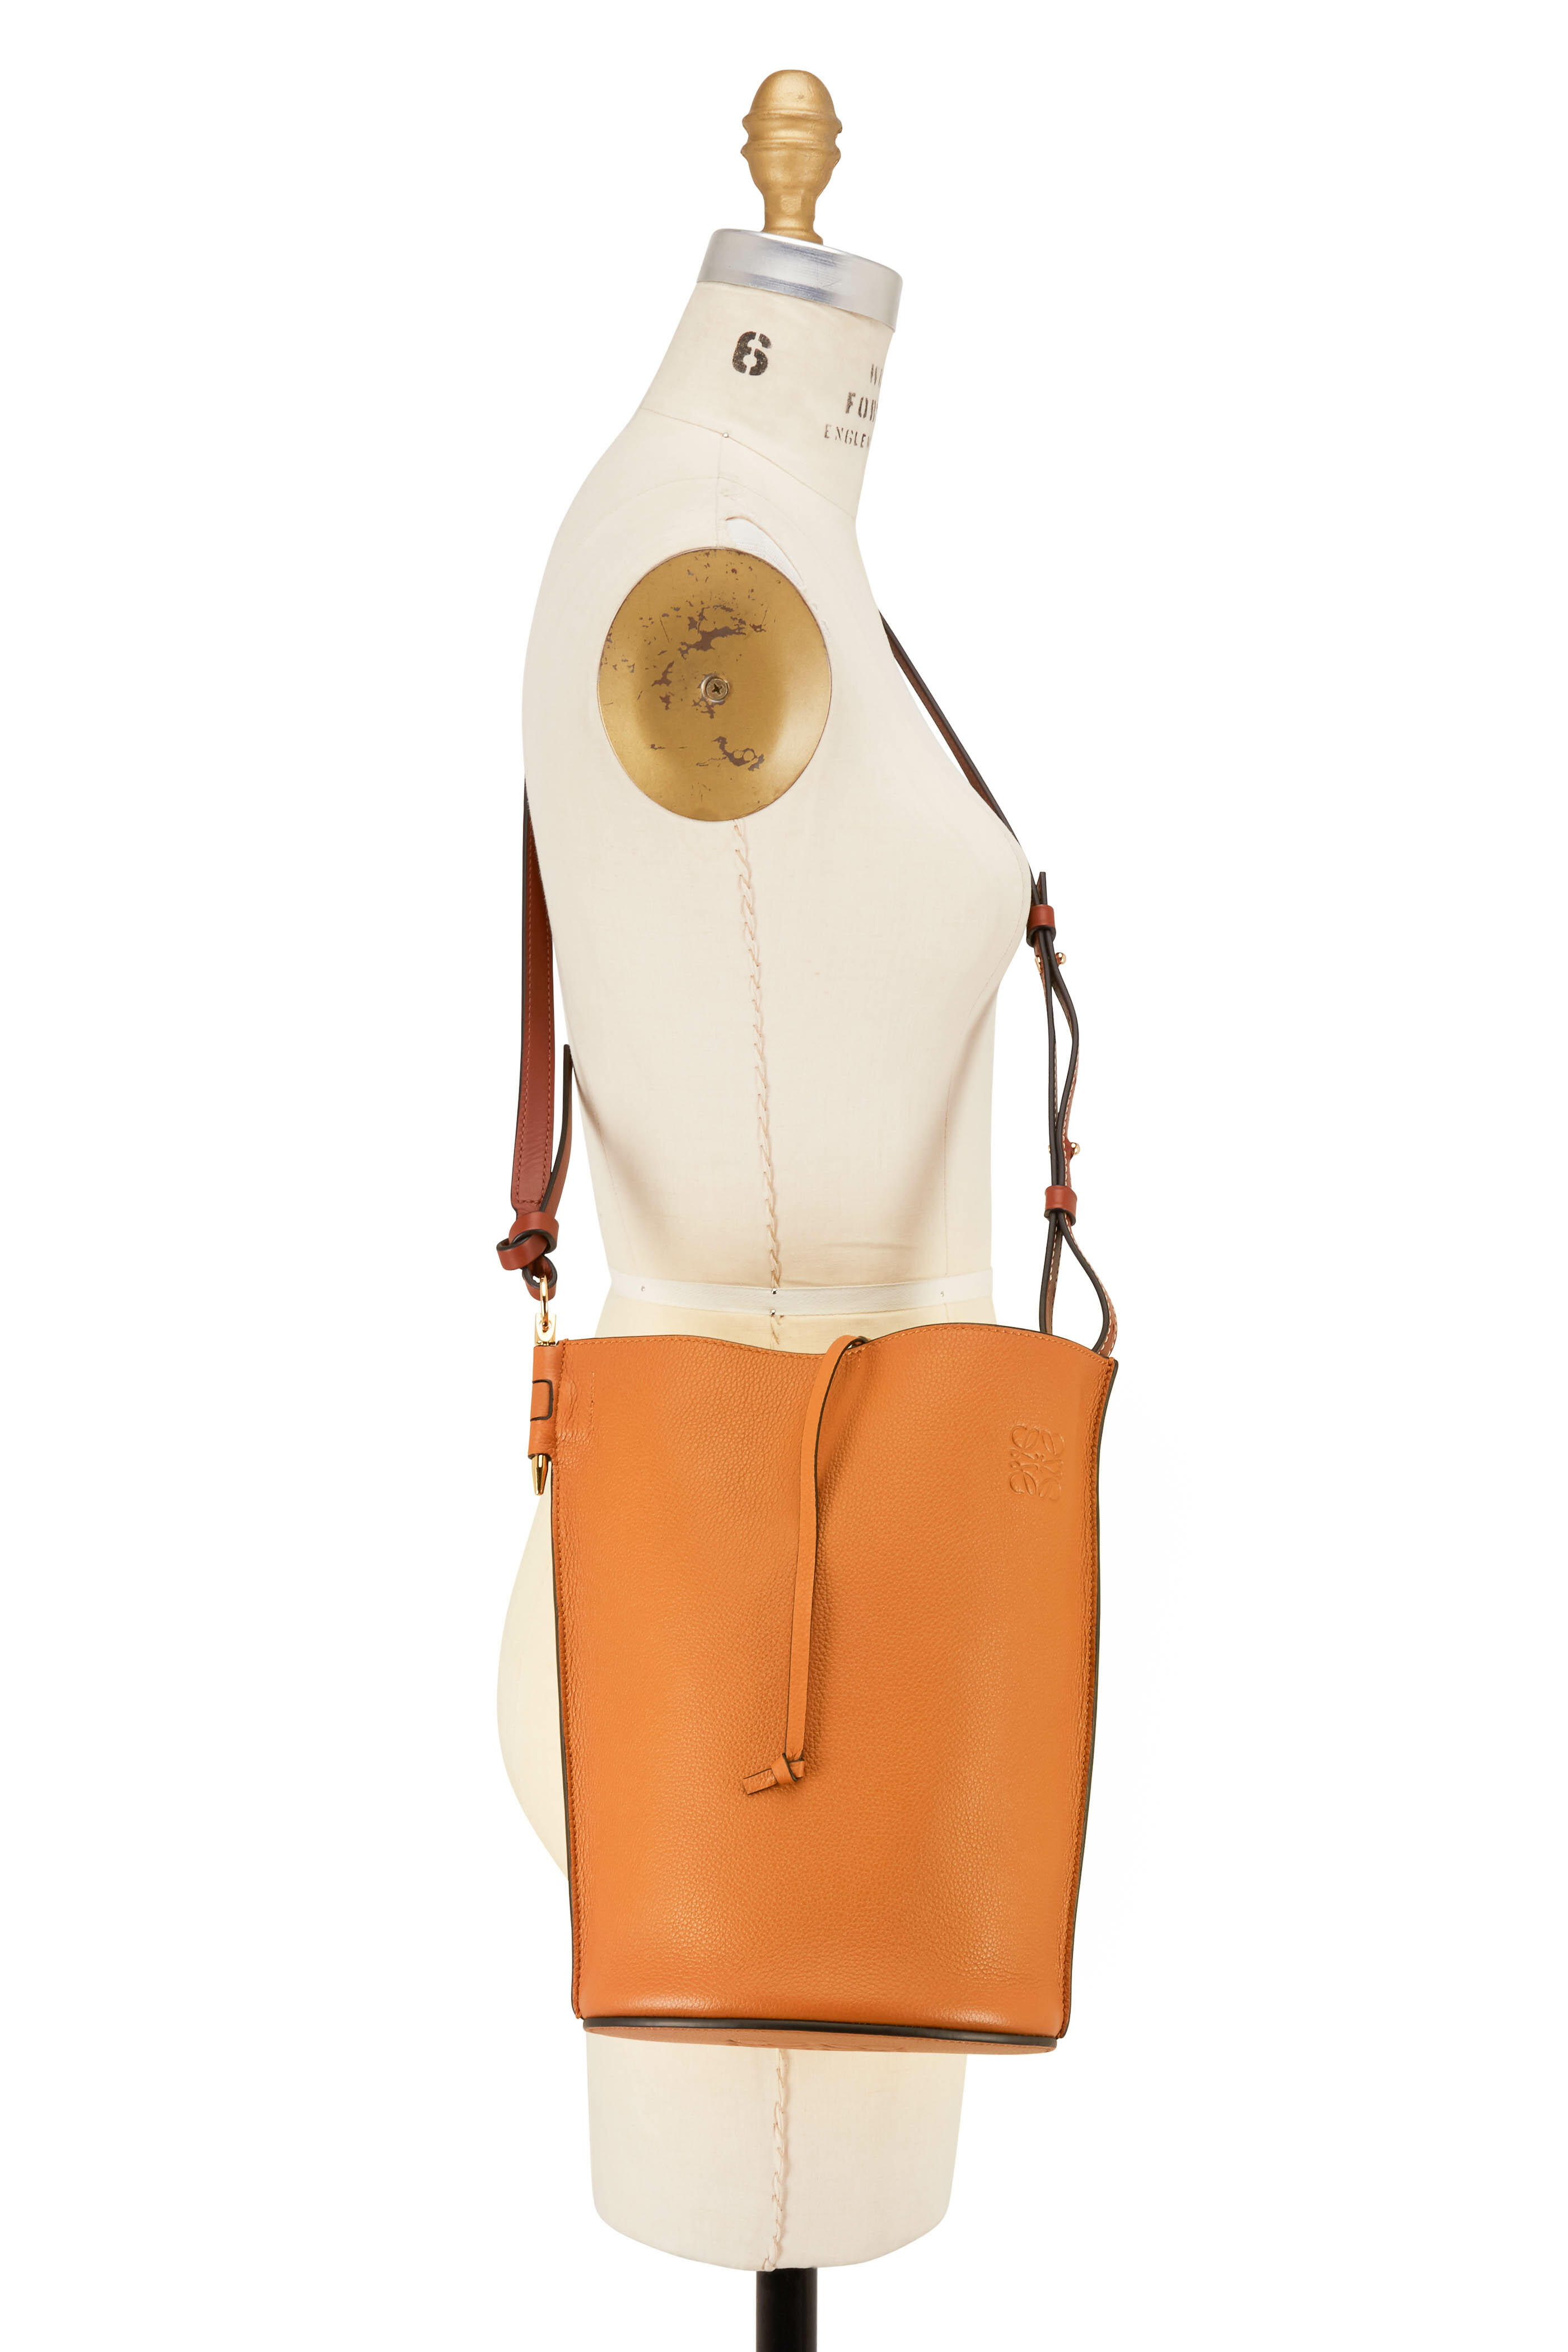 Loewe Gate Anagram-perforated Leather Bucket Bag In White Multi